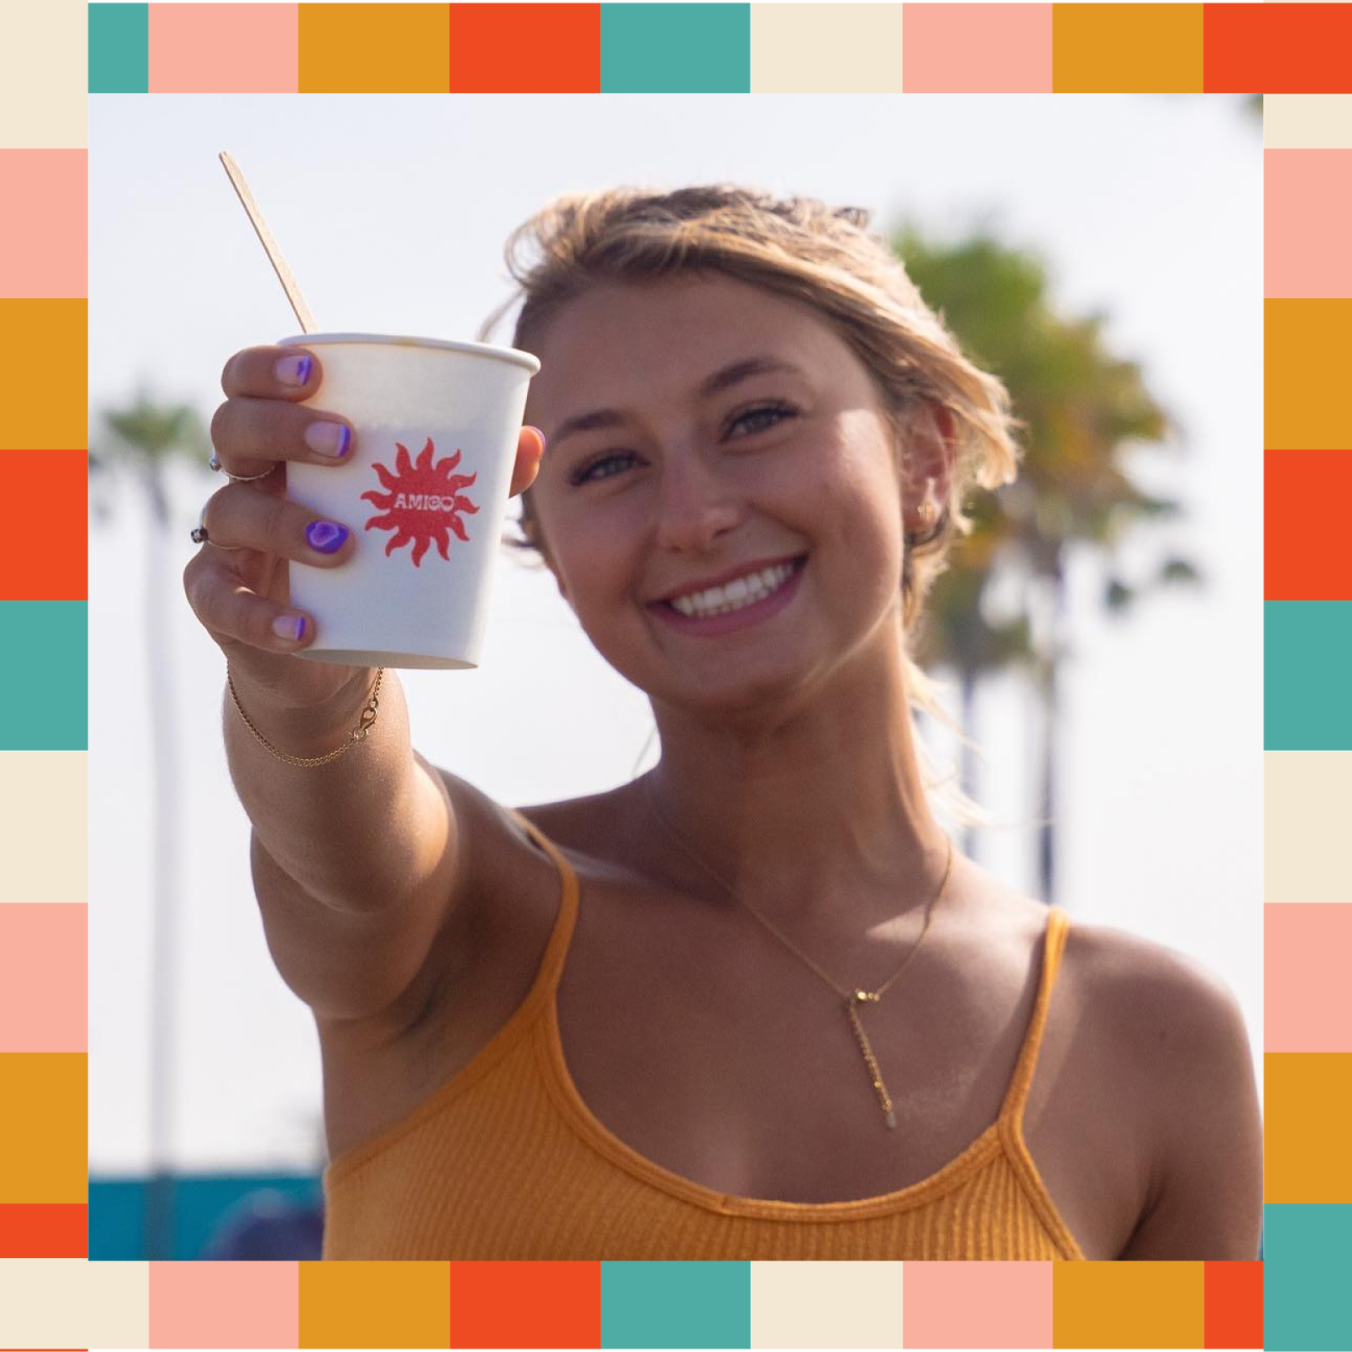 girl with a cup of amigo coffee